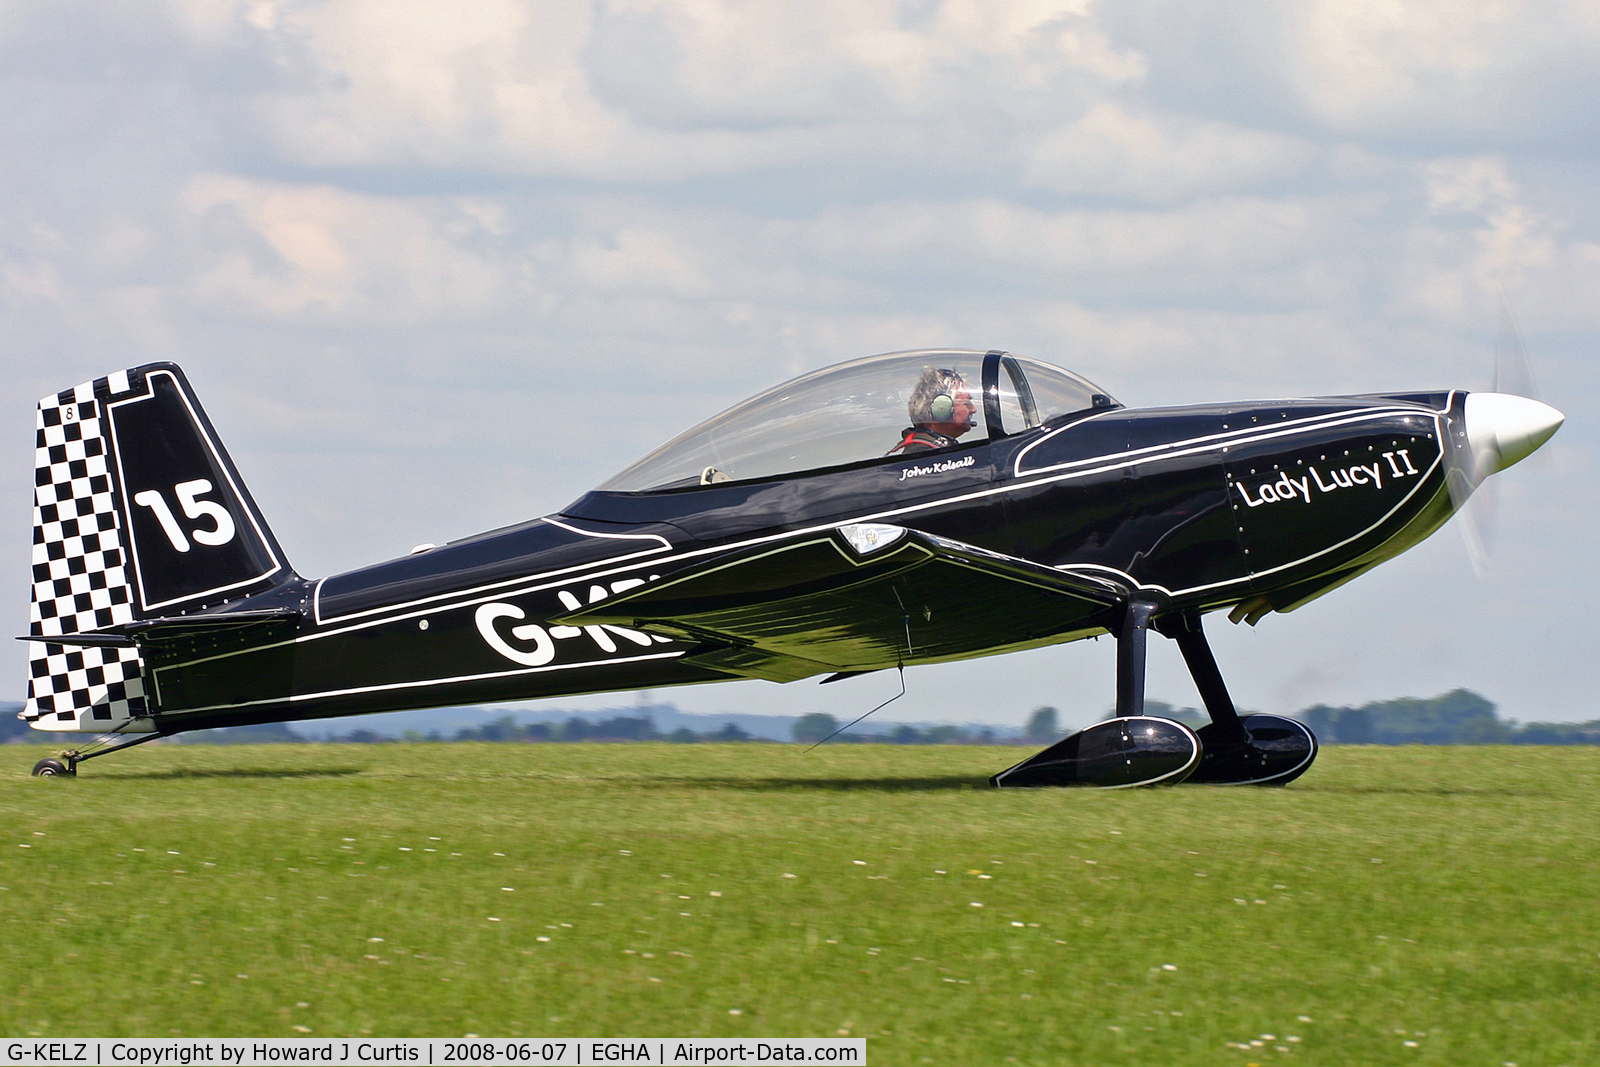 G-KELZ, 2003 Vans RV-8 C/N PFA 303-13665, Privately owned. Coded 15, at the Dorset Air Races. 'Lady Lucy II'.